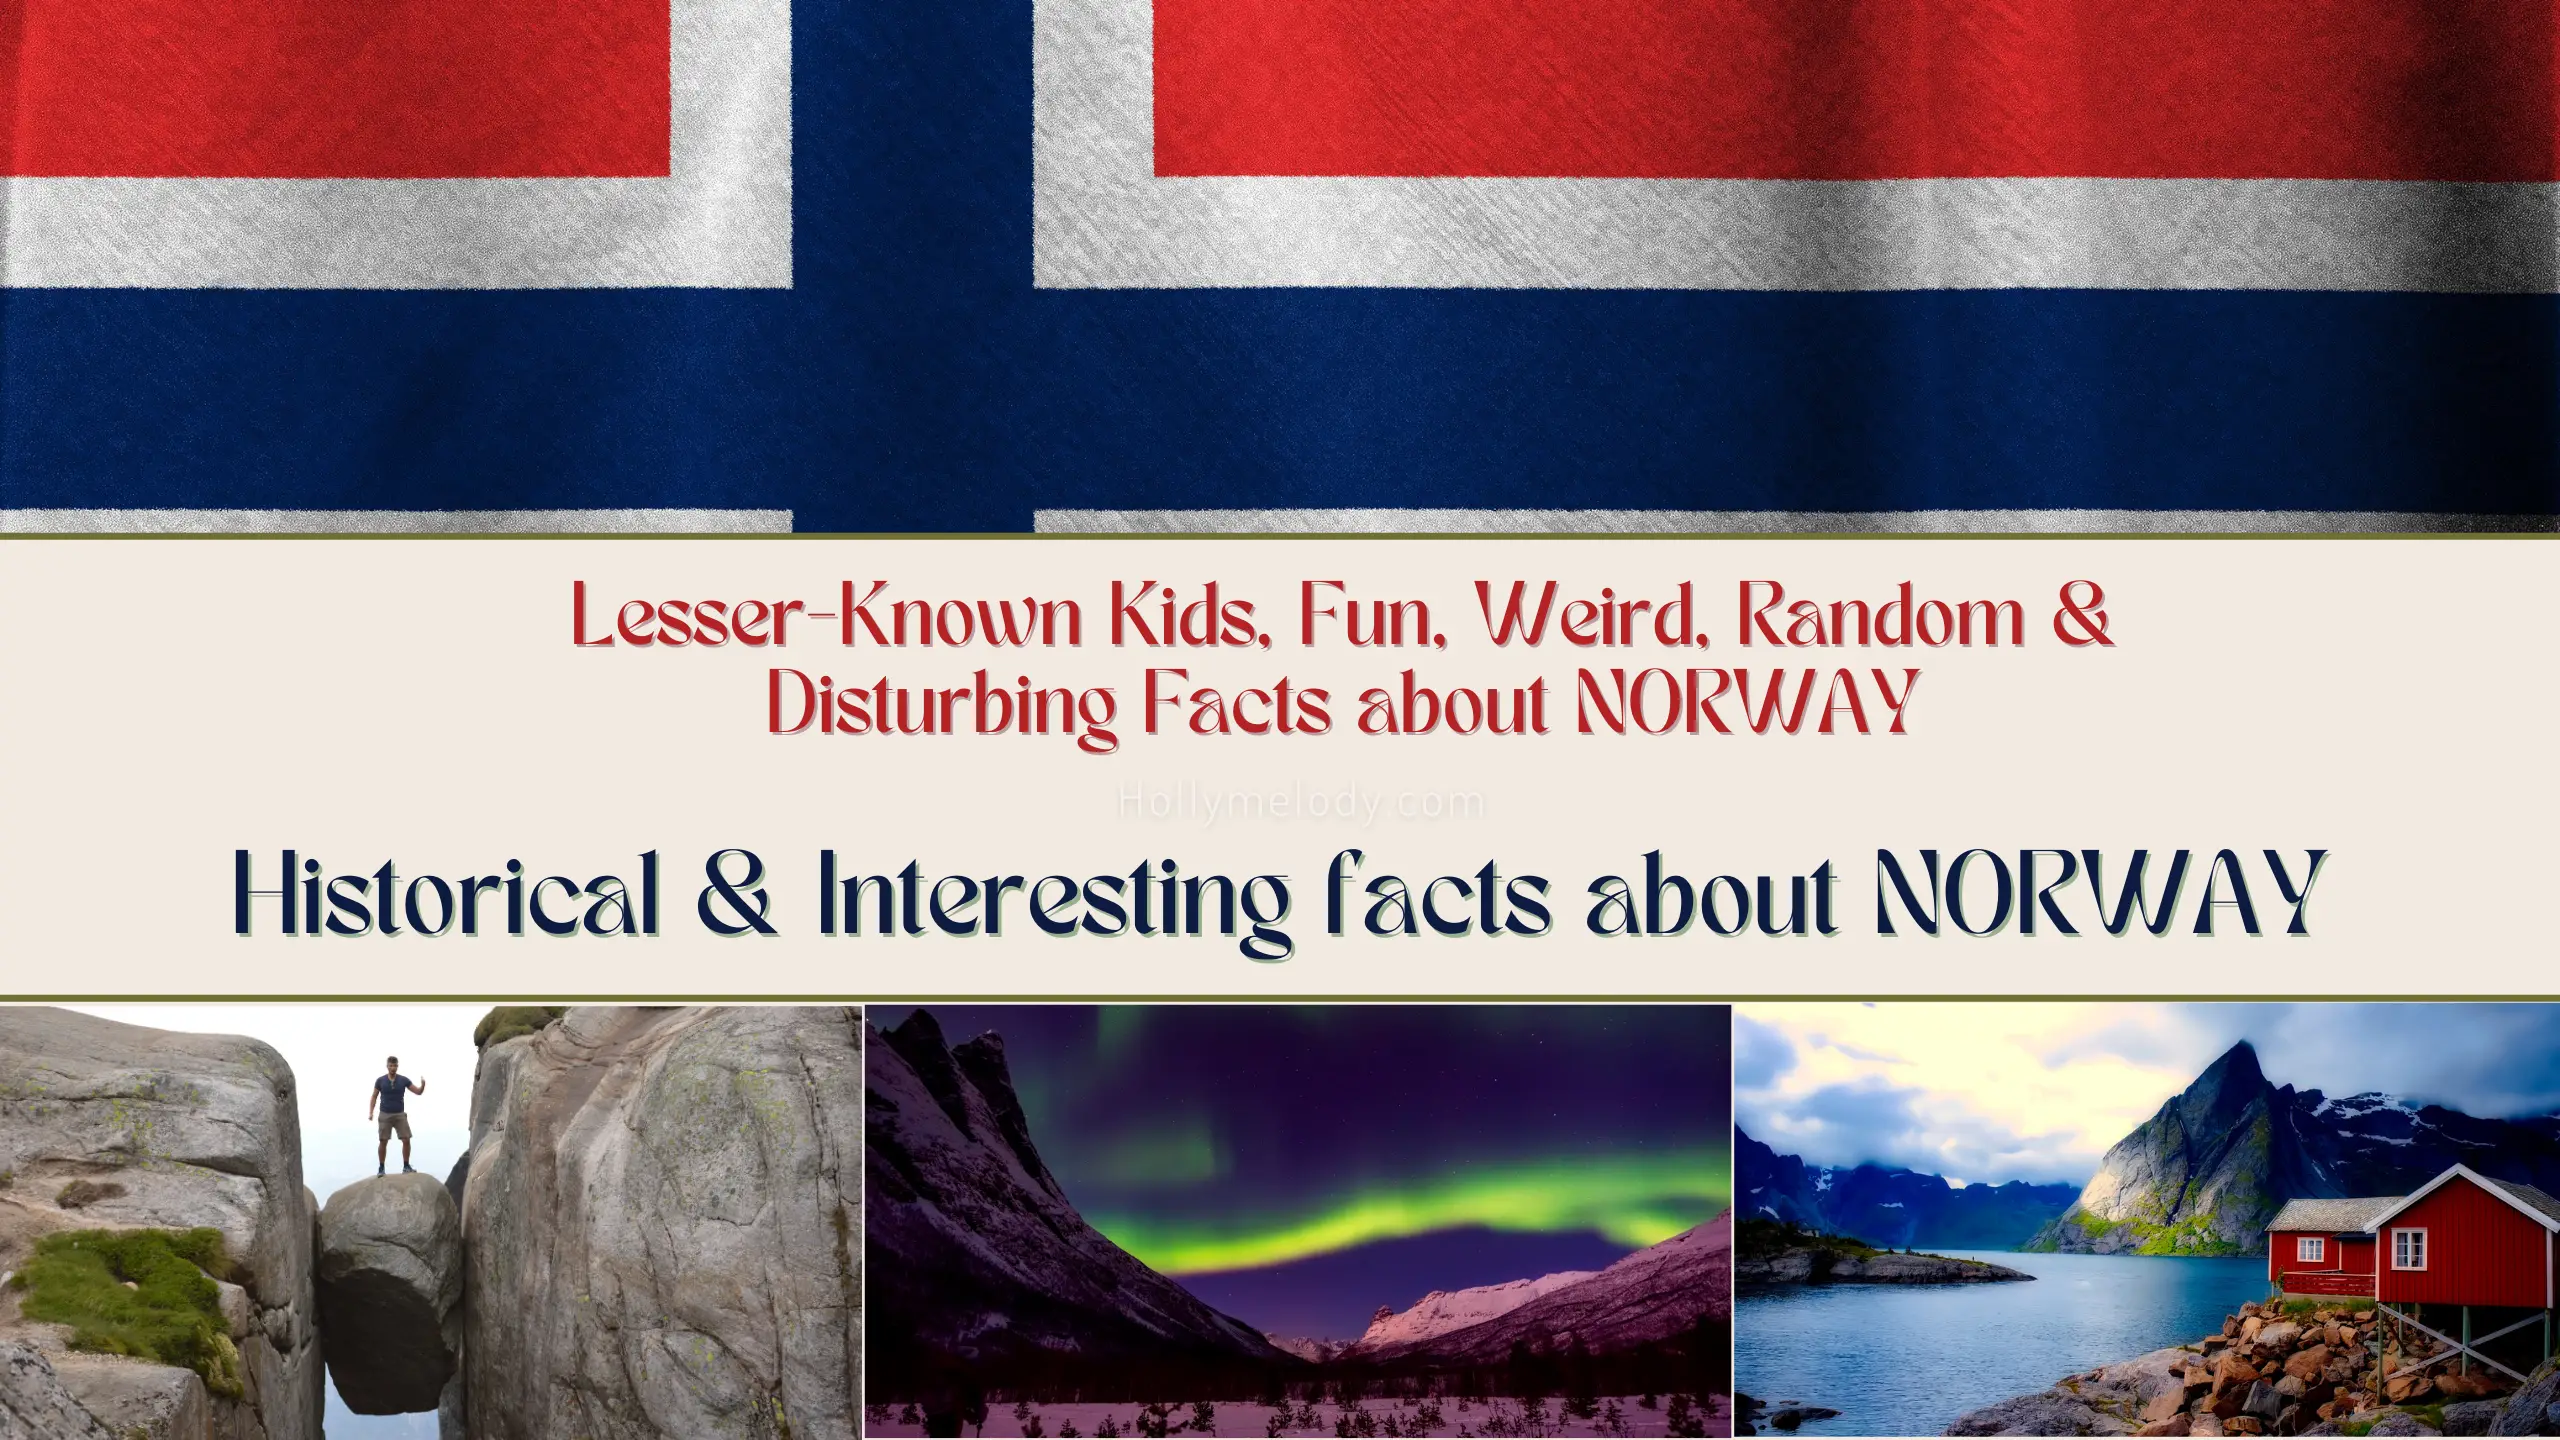 Lesser-Known Kids, Fun, Weird, Random & Disturbing Facts about NORWAY | Historical & Interesting facts about Norway